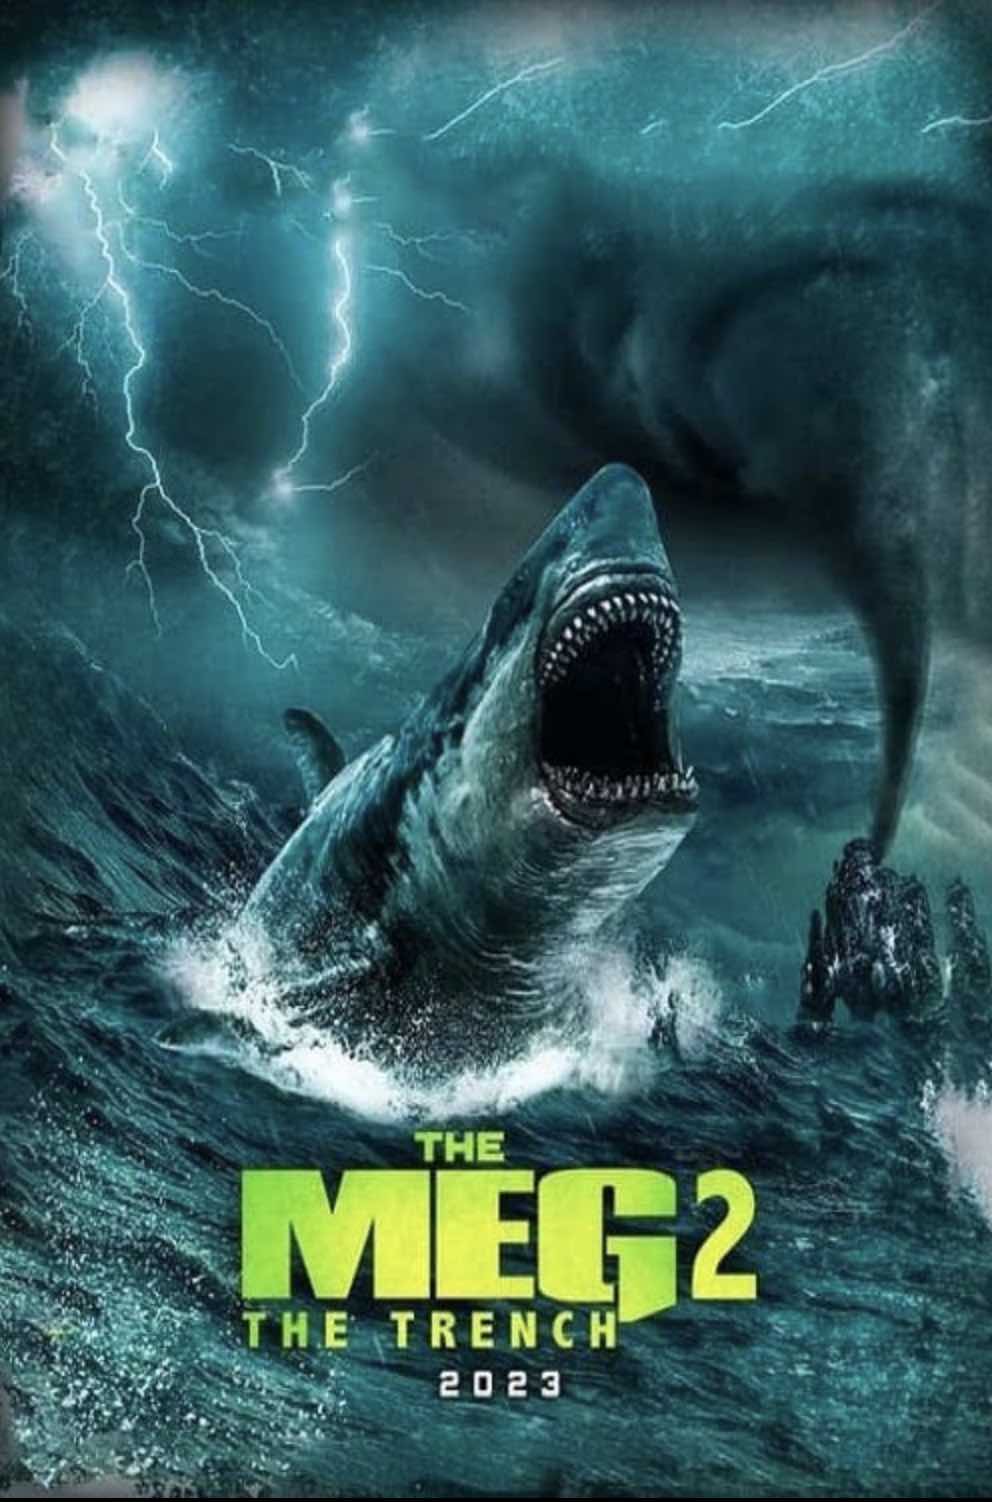 MEG 2 THE TRENCH (2023) Mega shark sequel MORE teasers and trailers